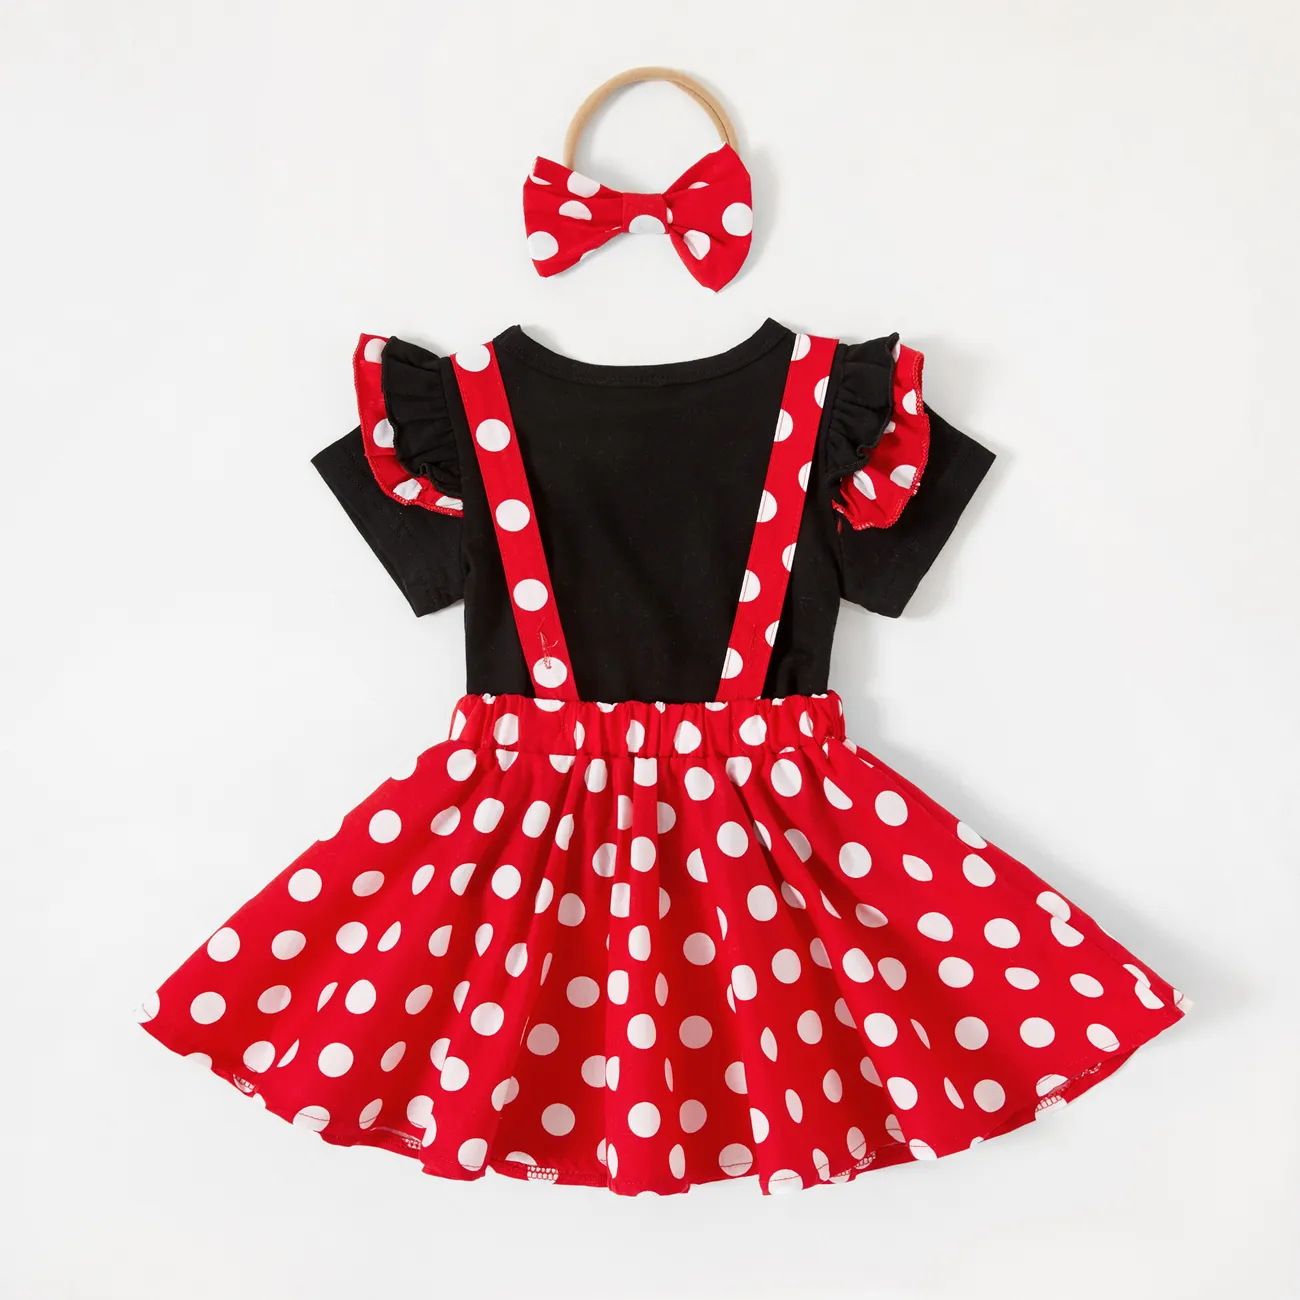 3pcs Baby Girl 95% Cotton Ruffle Short-sleeve Top and Polka Dots Bowknot Suspender Skirt with Headband Set Black/White/Red big image 1